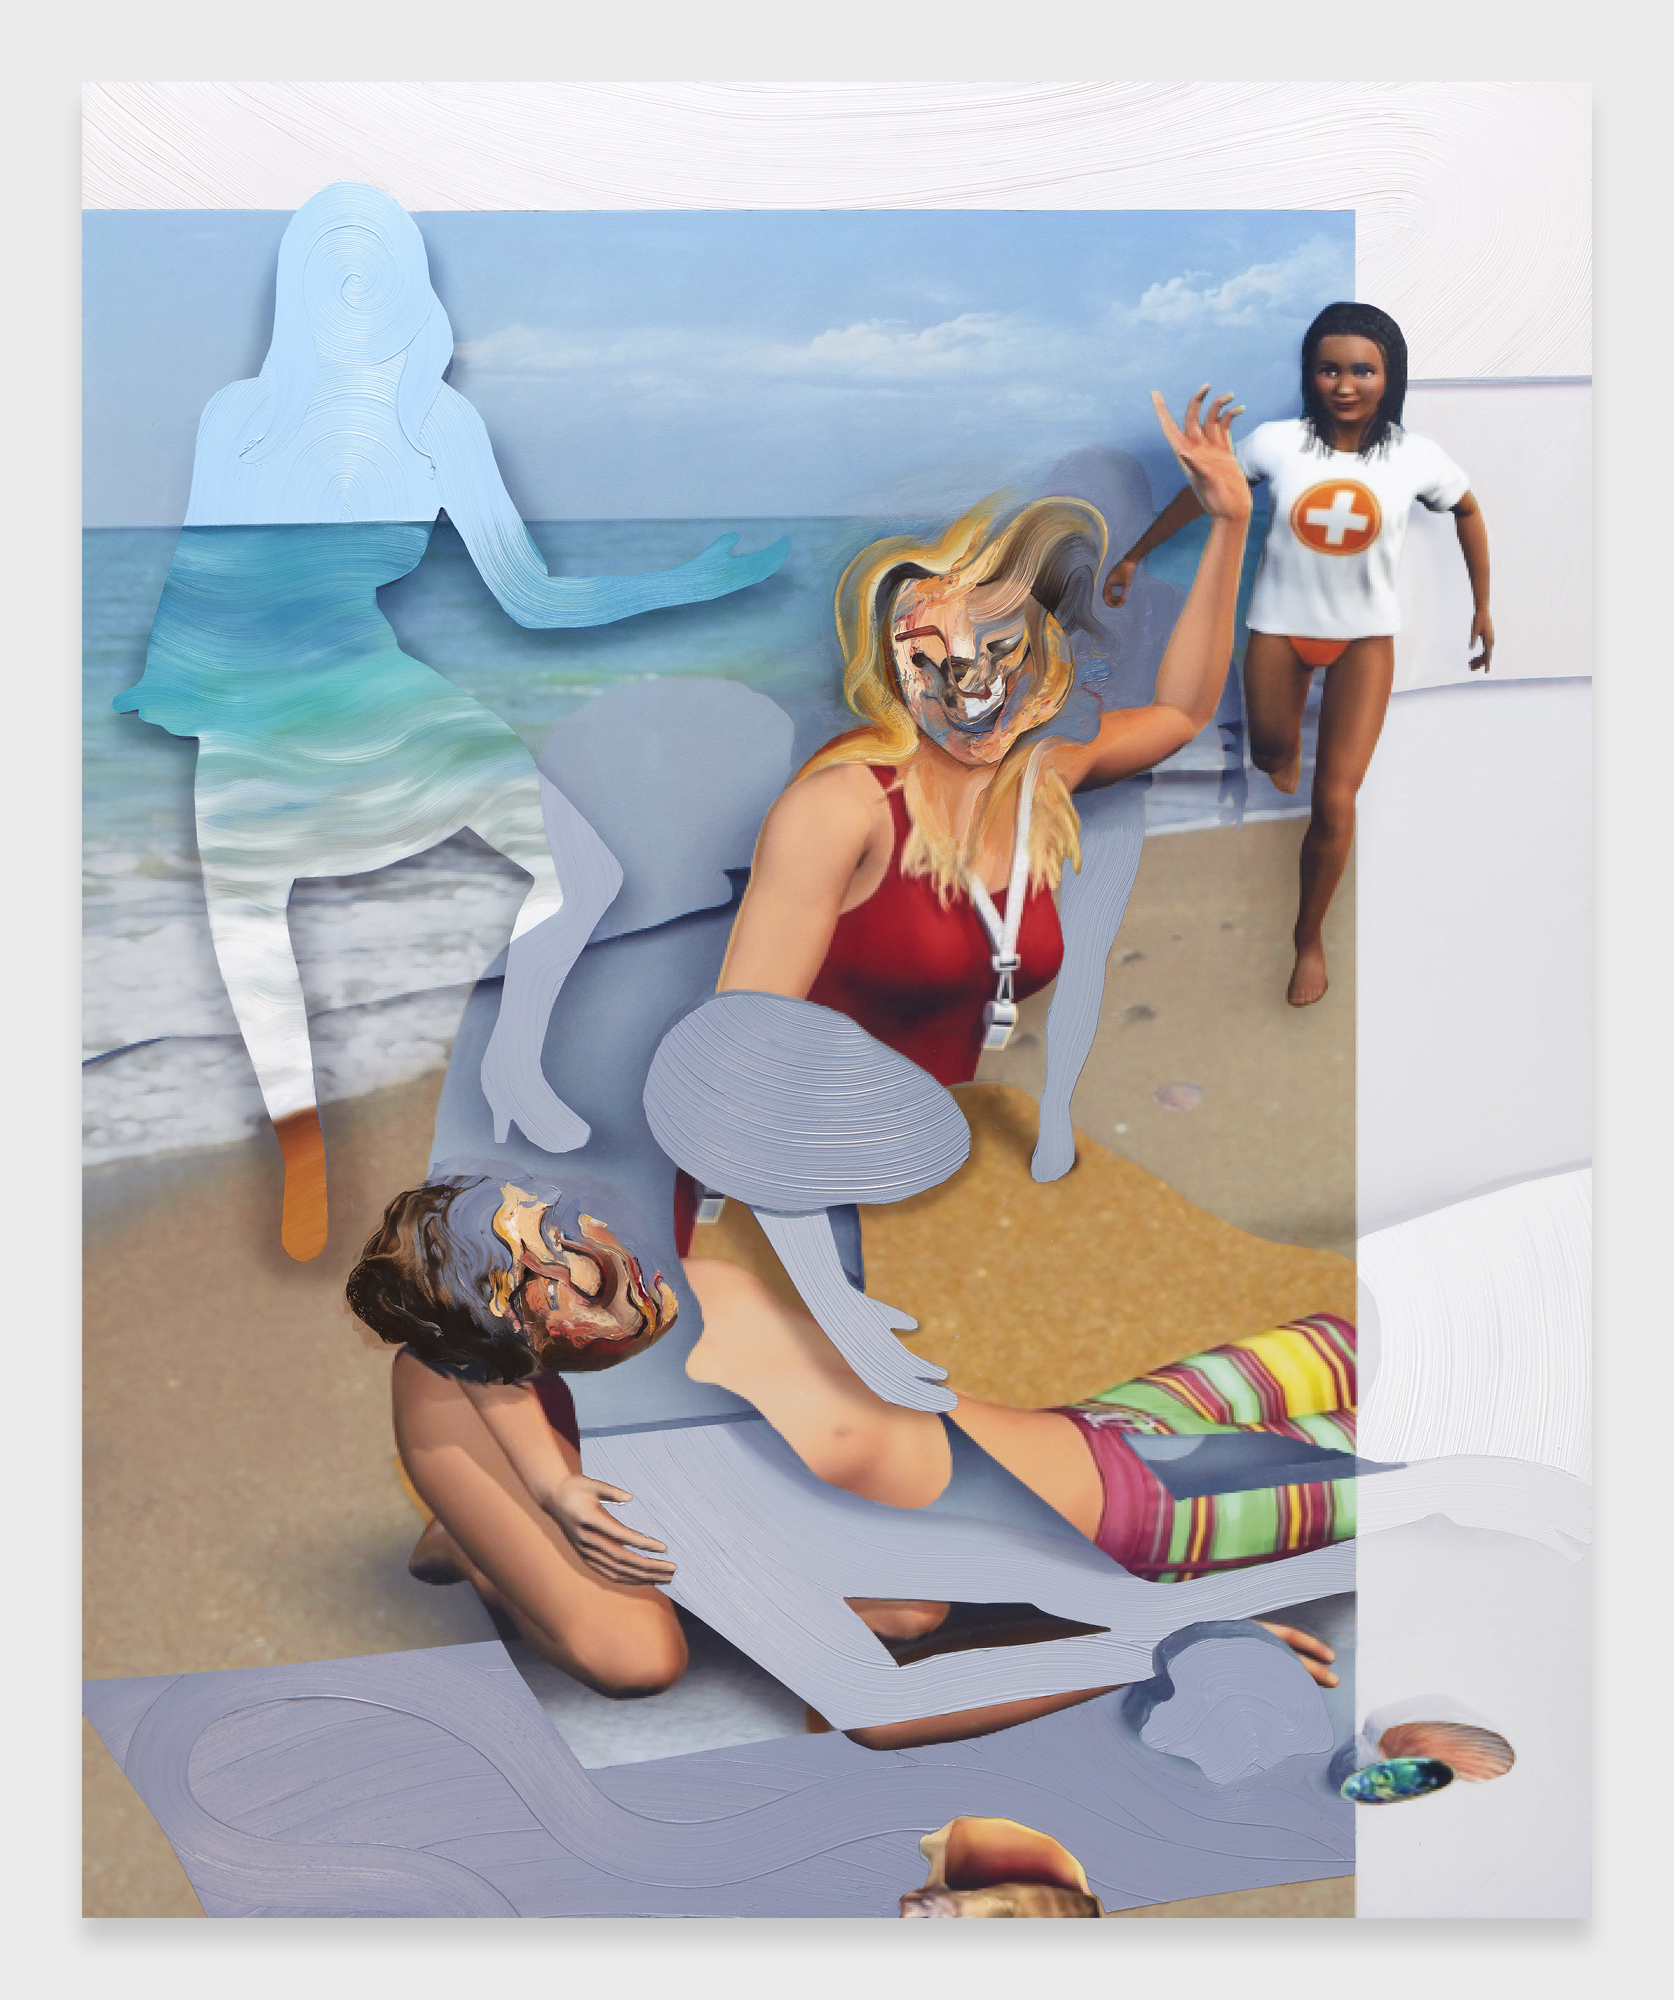 Shifted Sims #6 (Tropical Romance Island Community Event), 2020 PIETER SCHOOLWERTH